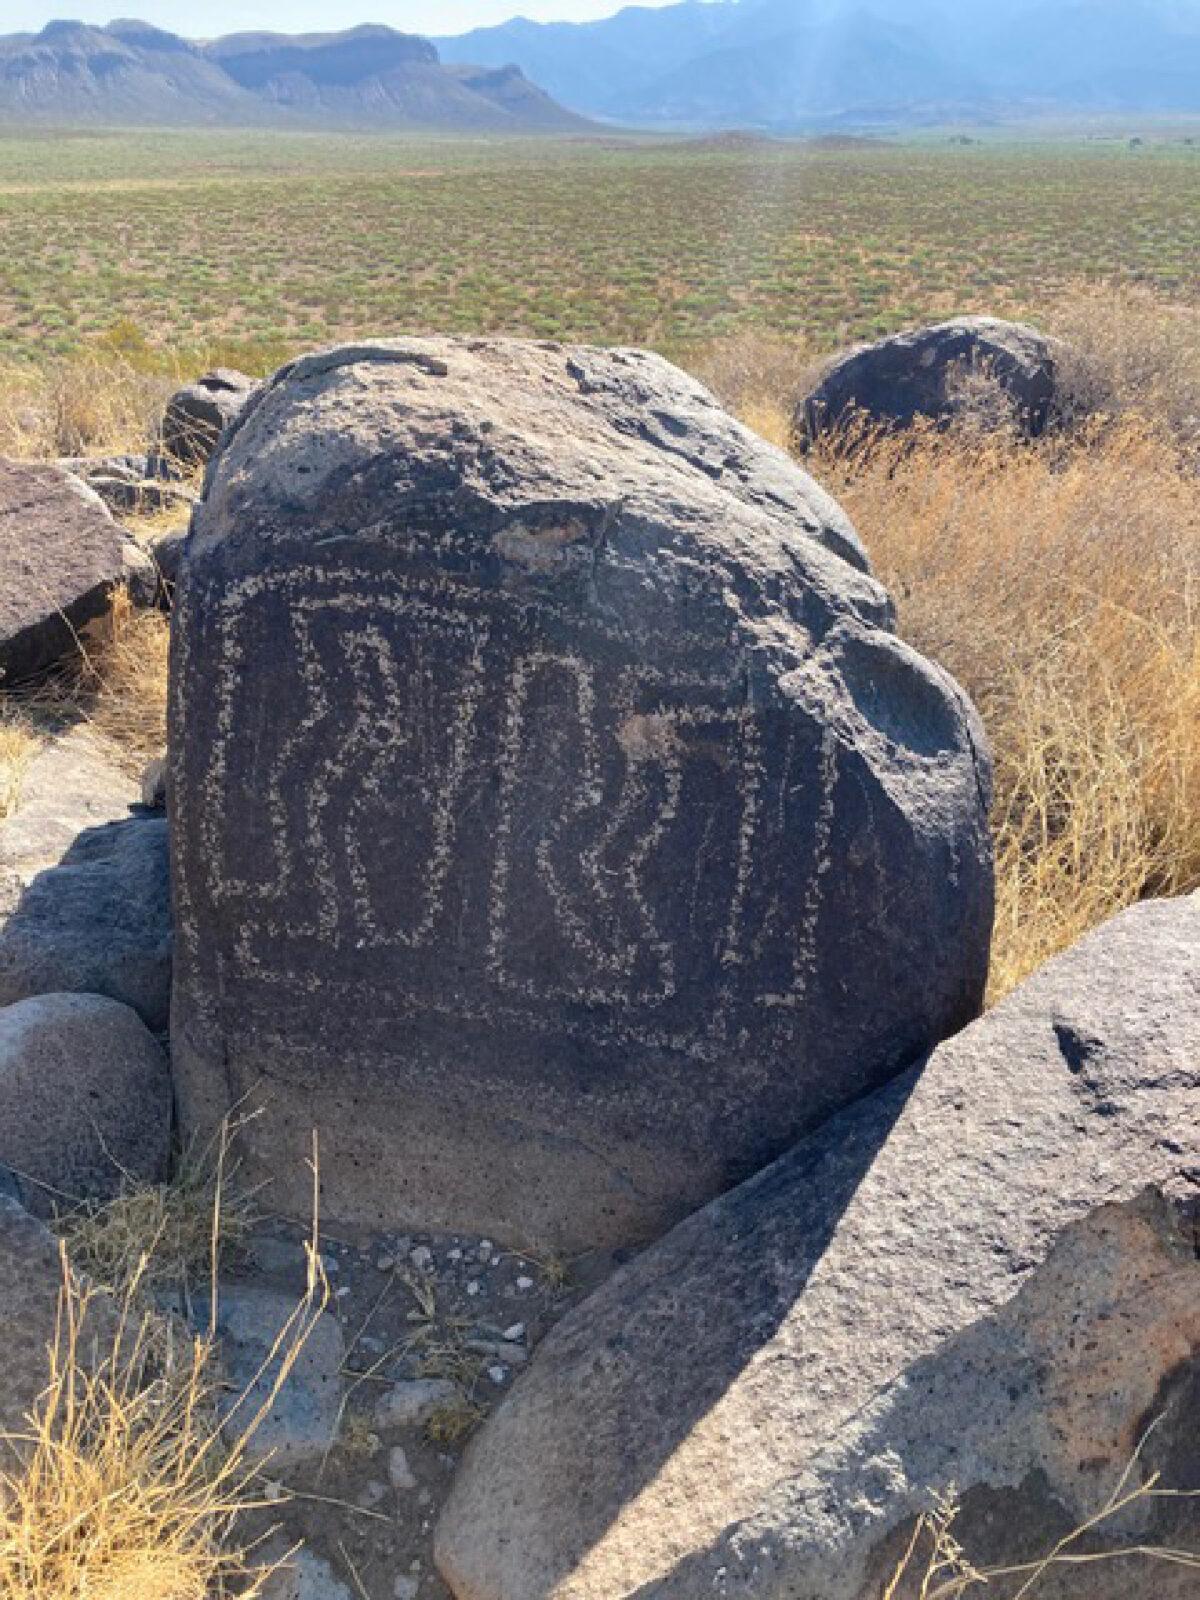 Some of the ancient petroglyphs at the Three Rivers Petroglyph Site in Tularosa, New Mexico, defy archaeologists' interpretation. (Bill Neely)